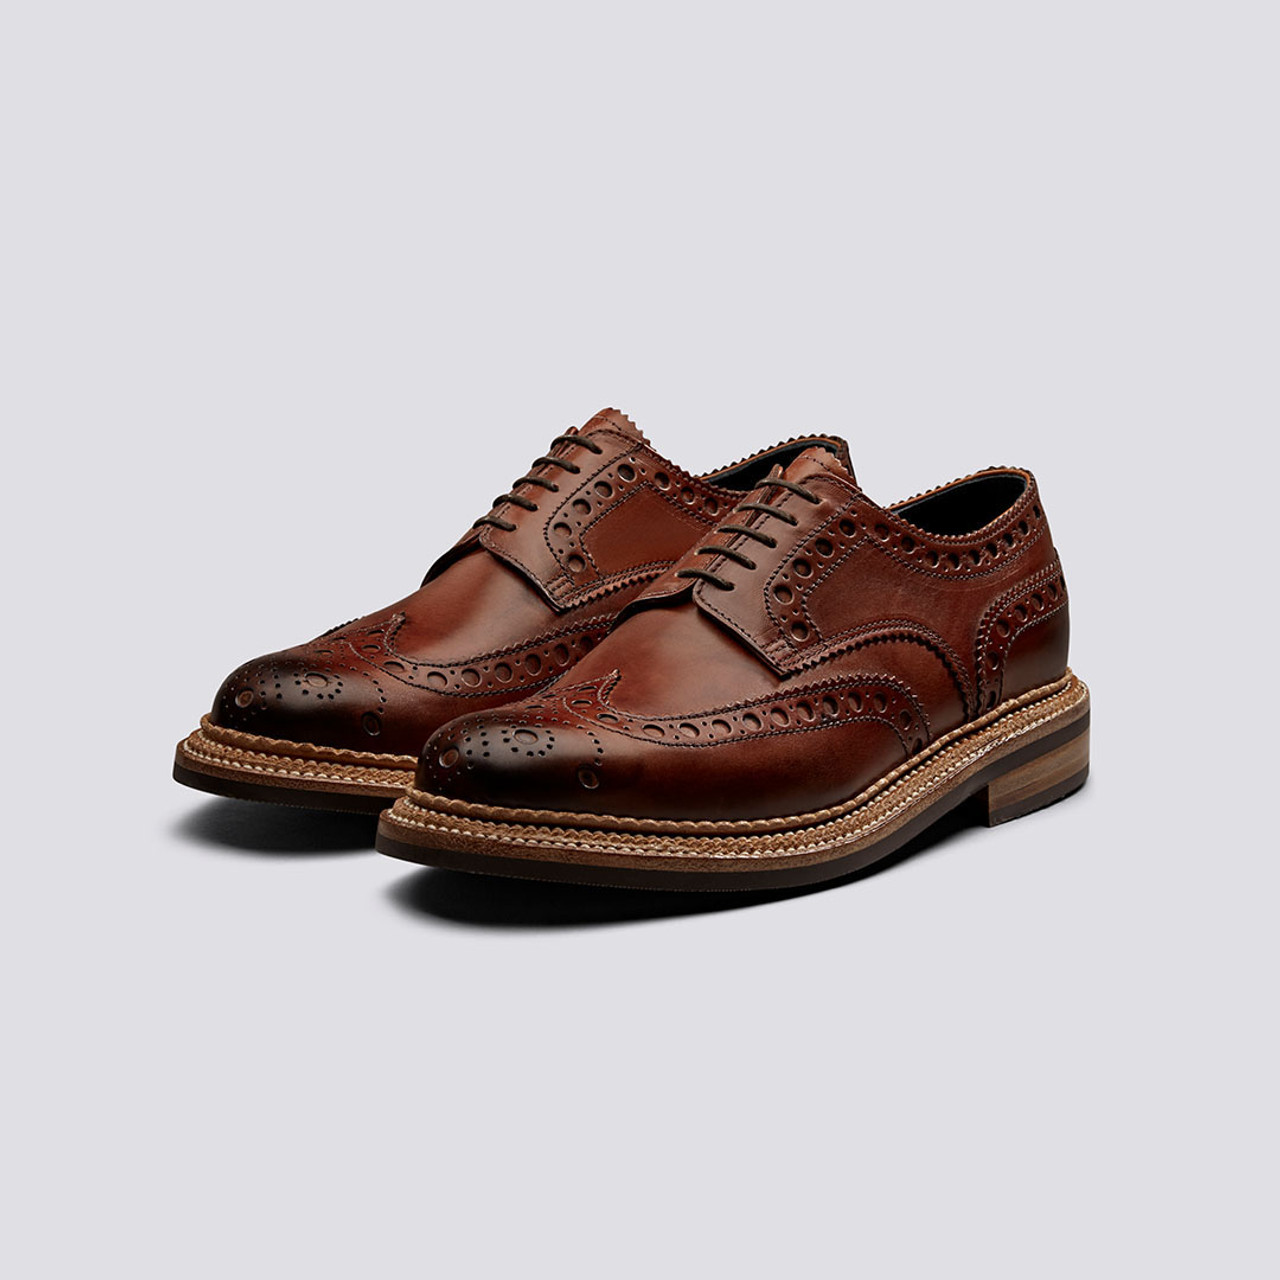 Archie Mens Brogue Shoes in Tan Handpainted Leather with a Triple Welt | Grenson Shoes